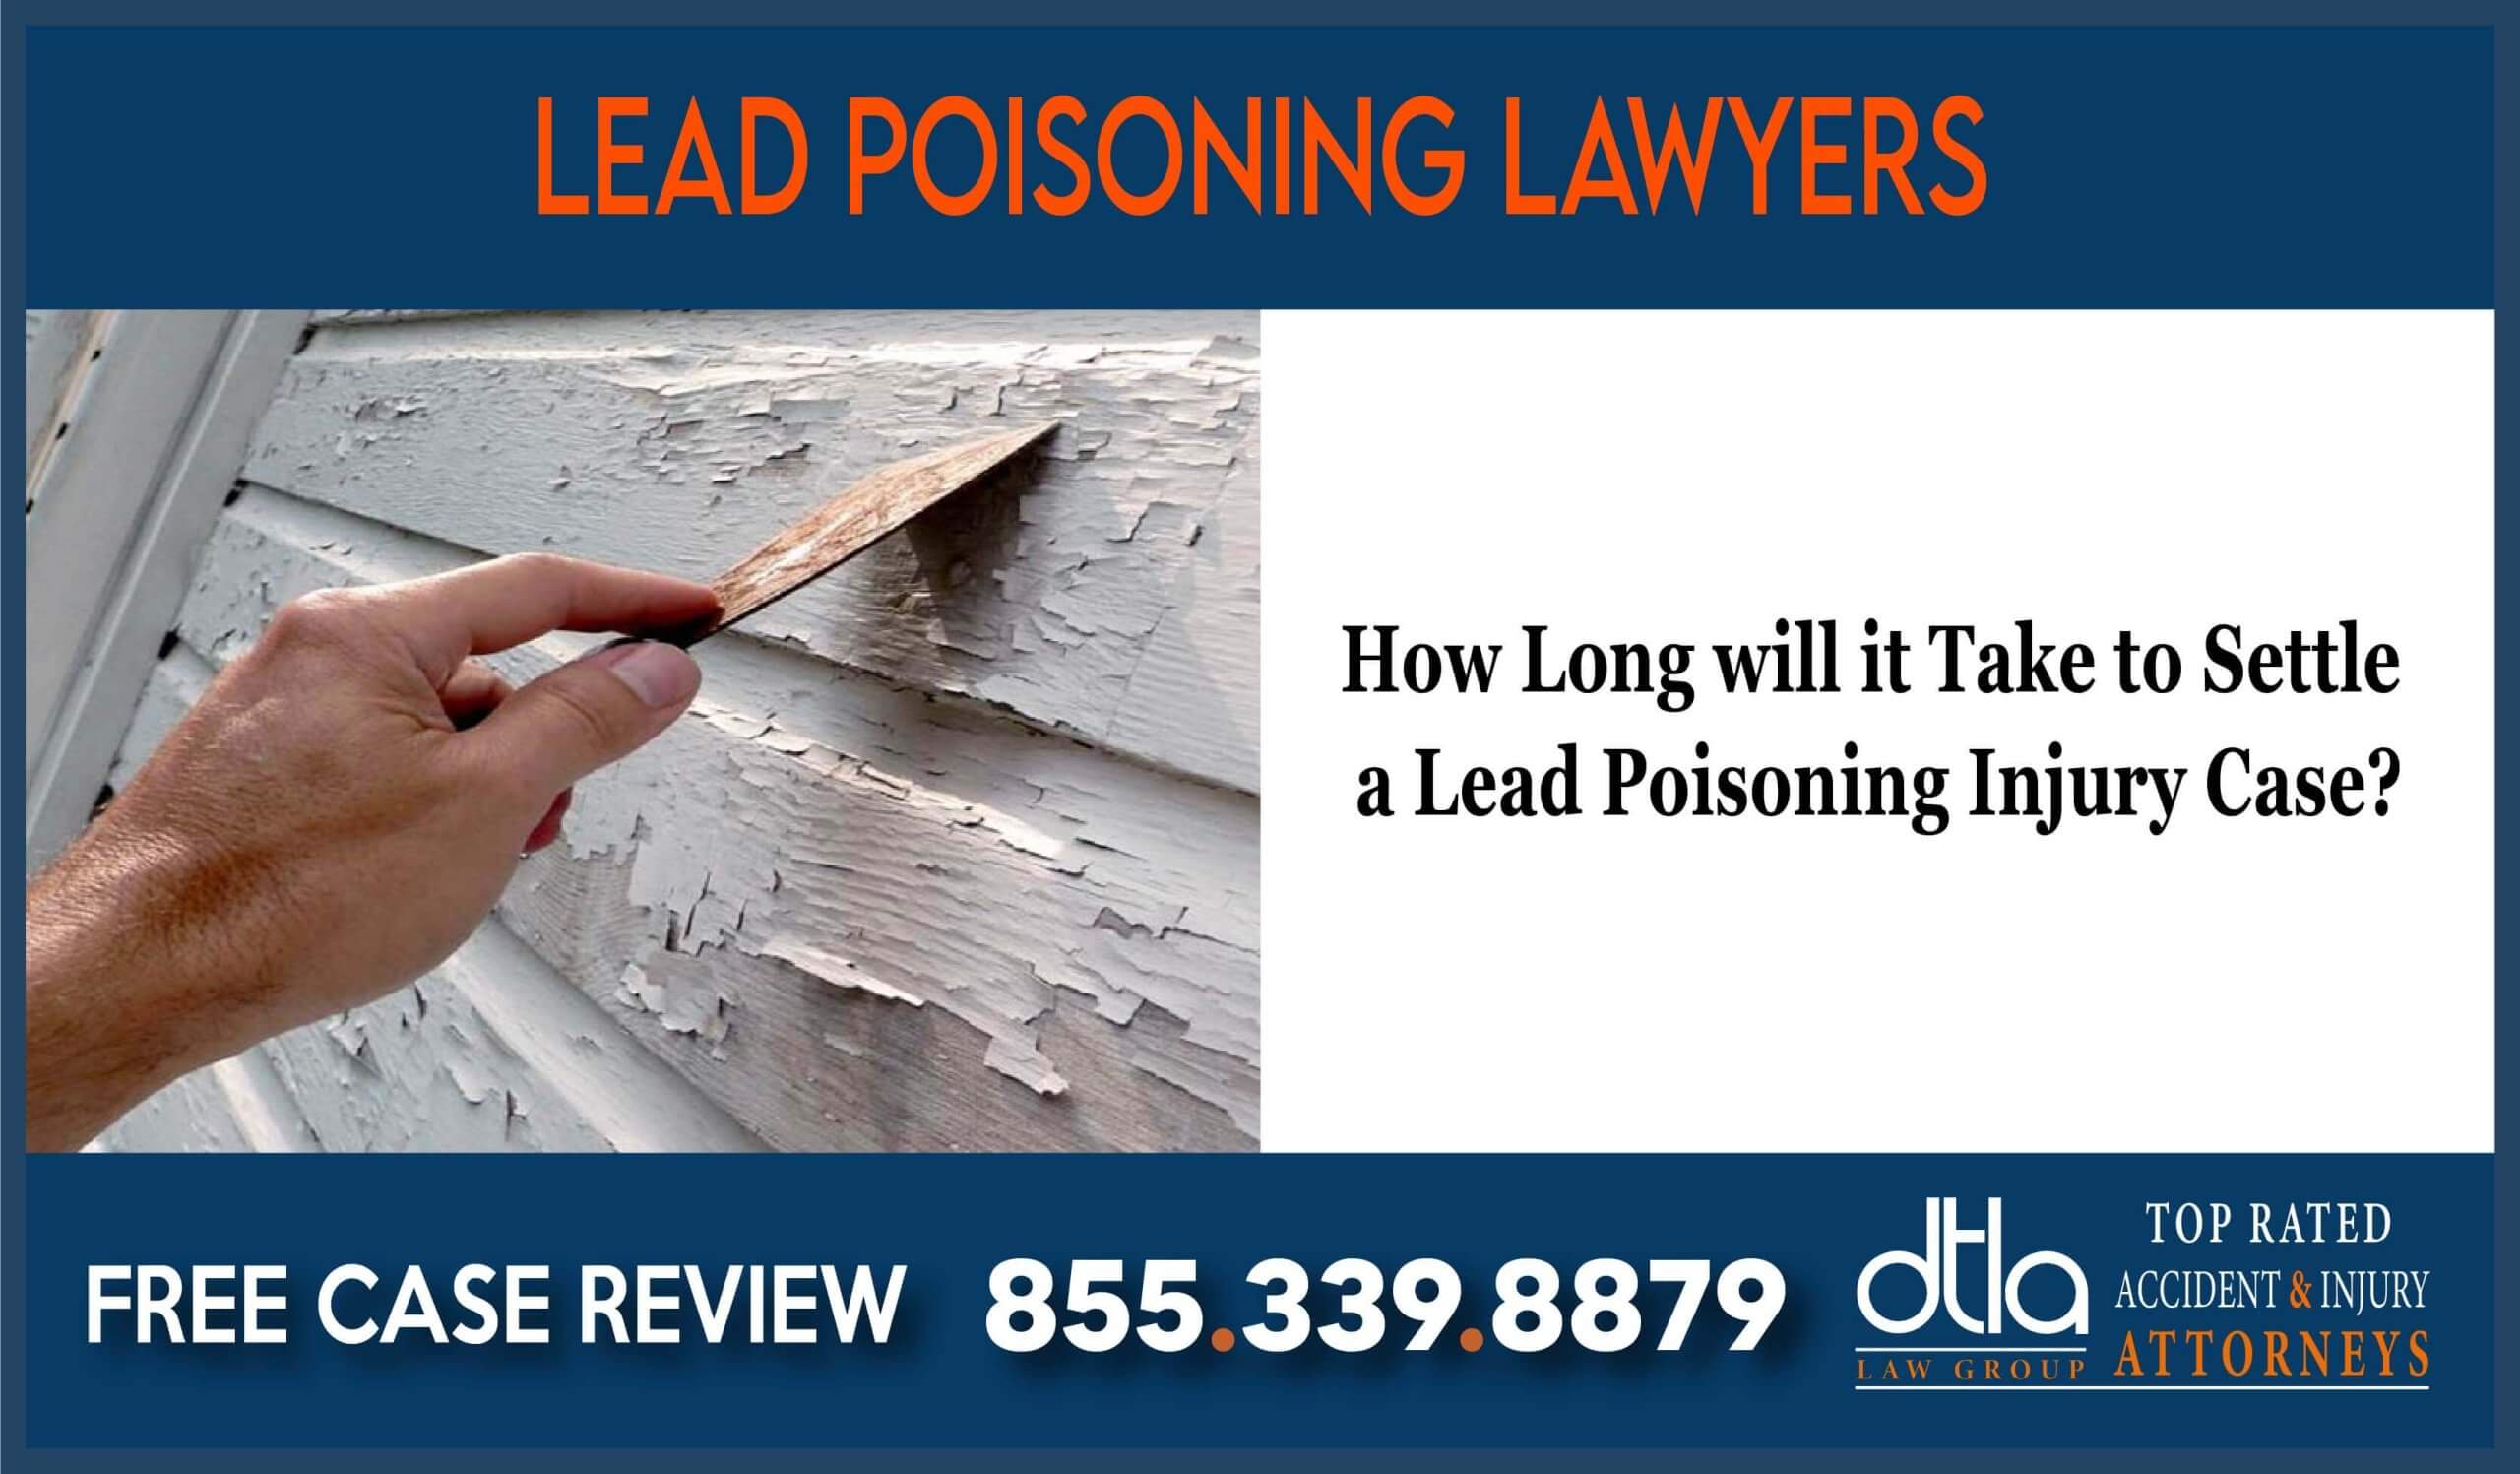 How Long will it Take to Settle a Lead Poisoning Injury Case lawyer attorney sue lawsuit compensation liability